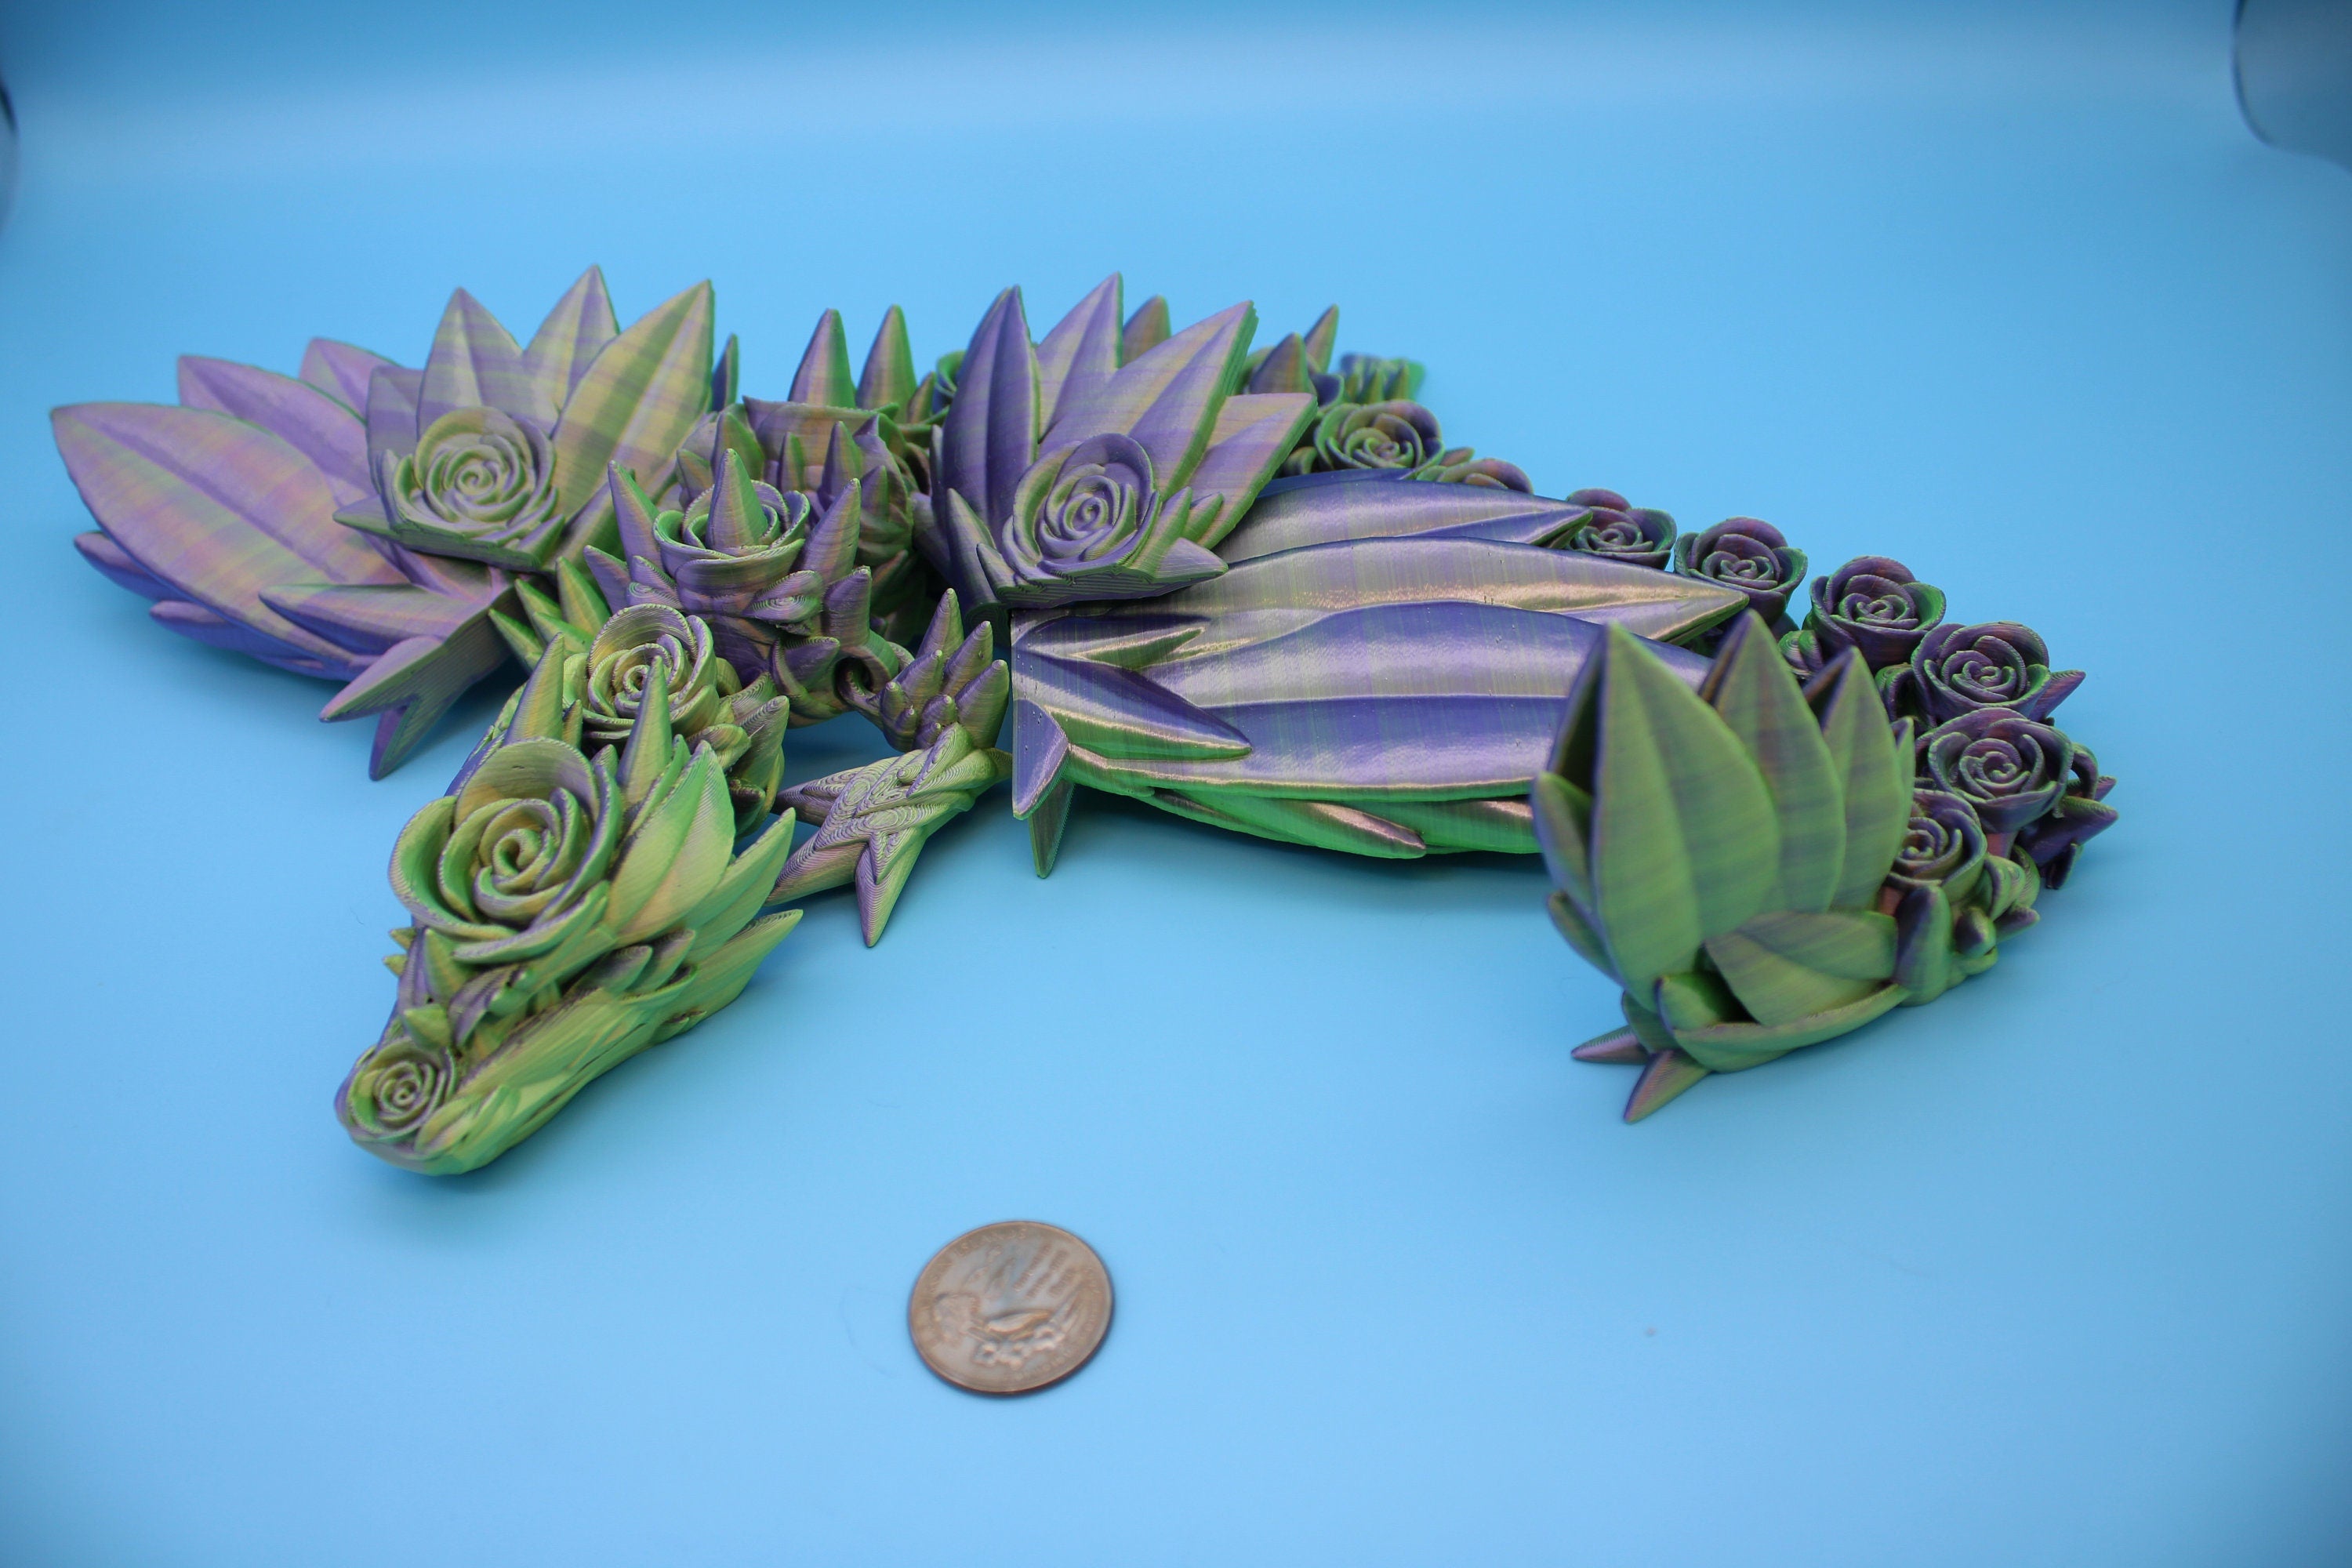 Flawed "Two tone" Rose Wing Articulating Dragon | 3D Printed Fidget | Flexi Toy | Adult Fidget Toy | Sensory Desk Toy | 19 in.